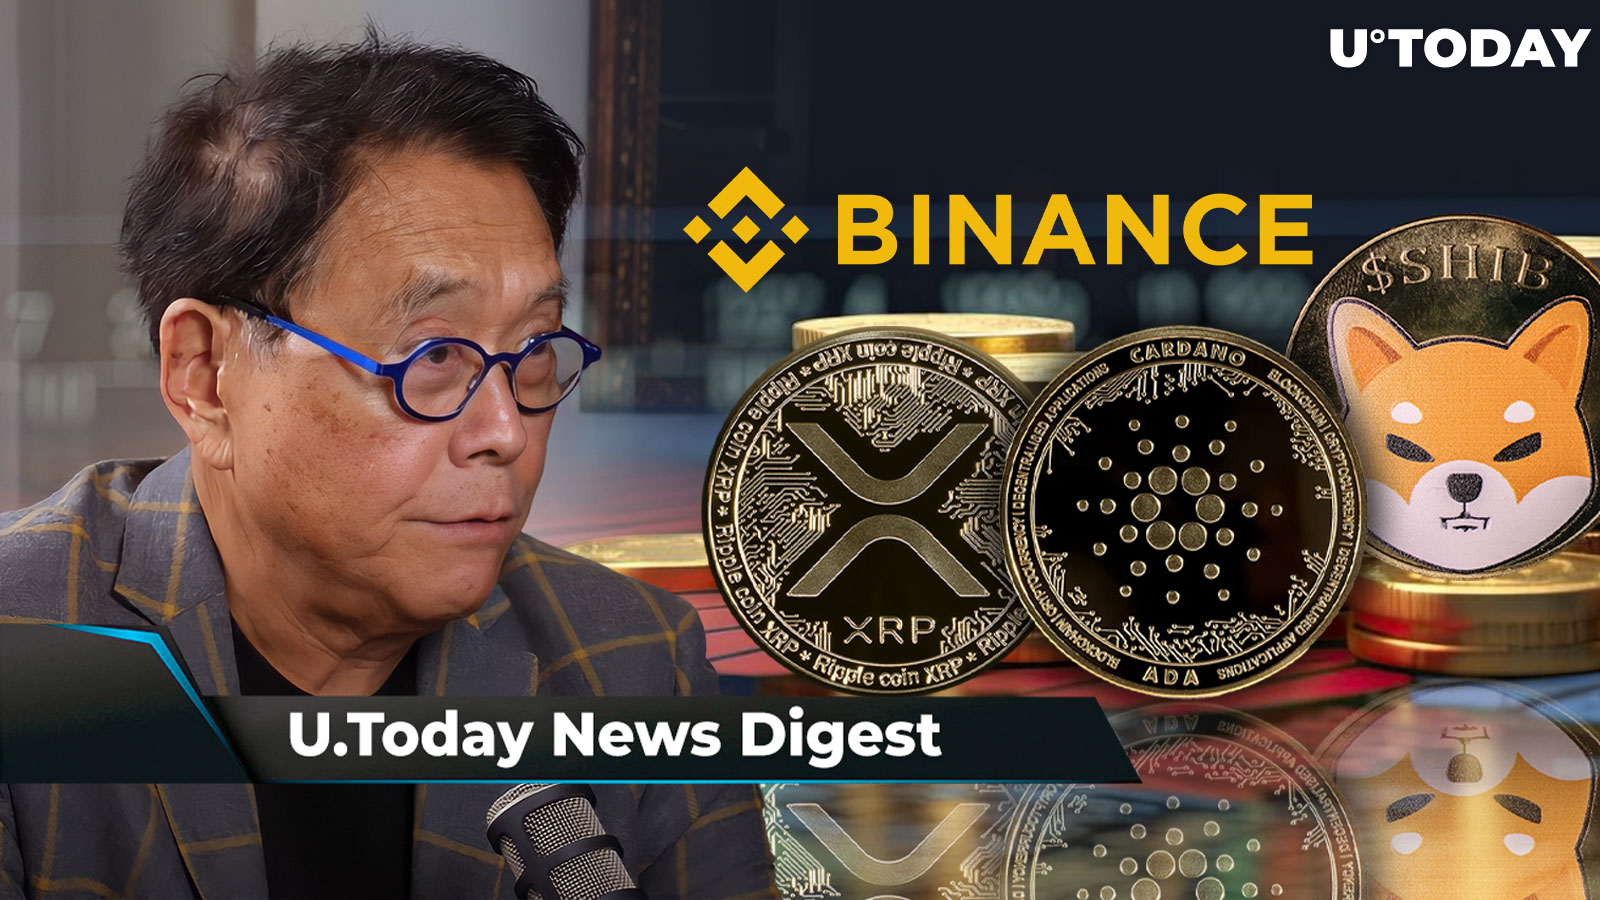 Binance's New Notice Might Concern SHIB, ADA, XRP Holders, Robert Kiyosaki Warns of Global Economic Depression, Gigantic BTC Price Rise Expected Soon: Crypto News Digest by U.Today